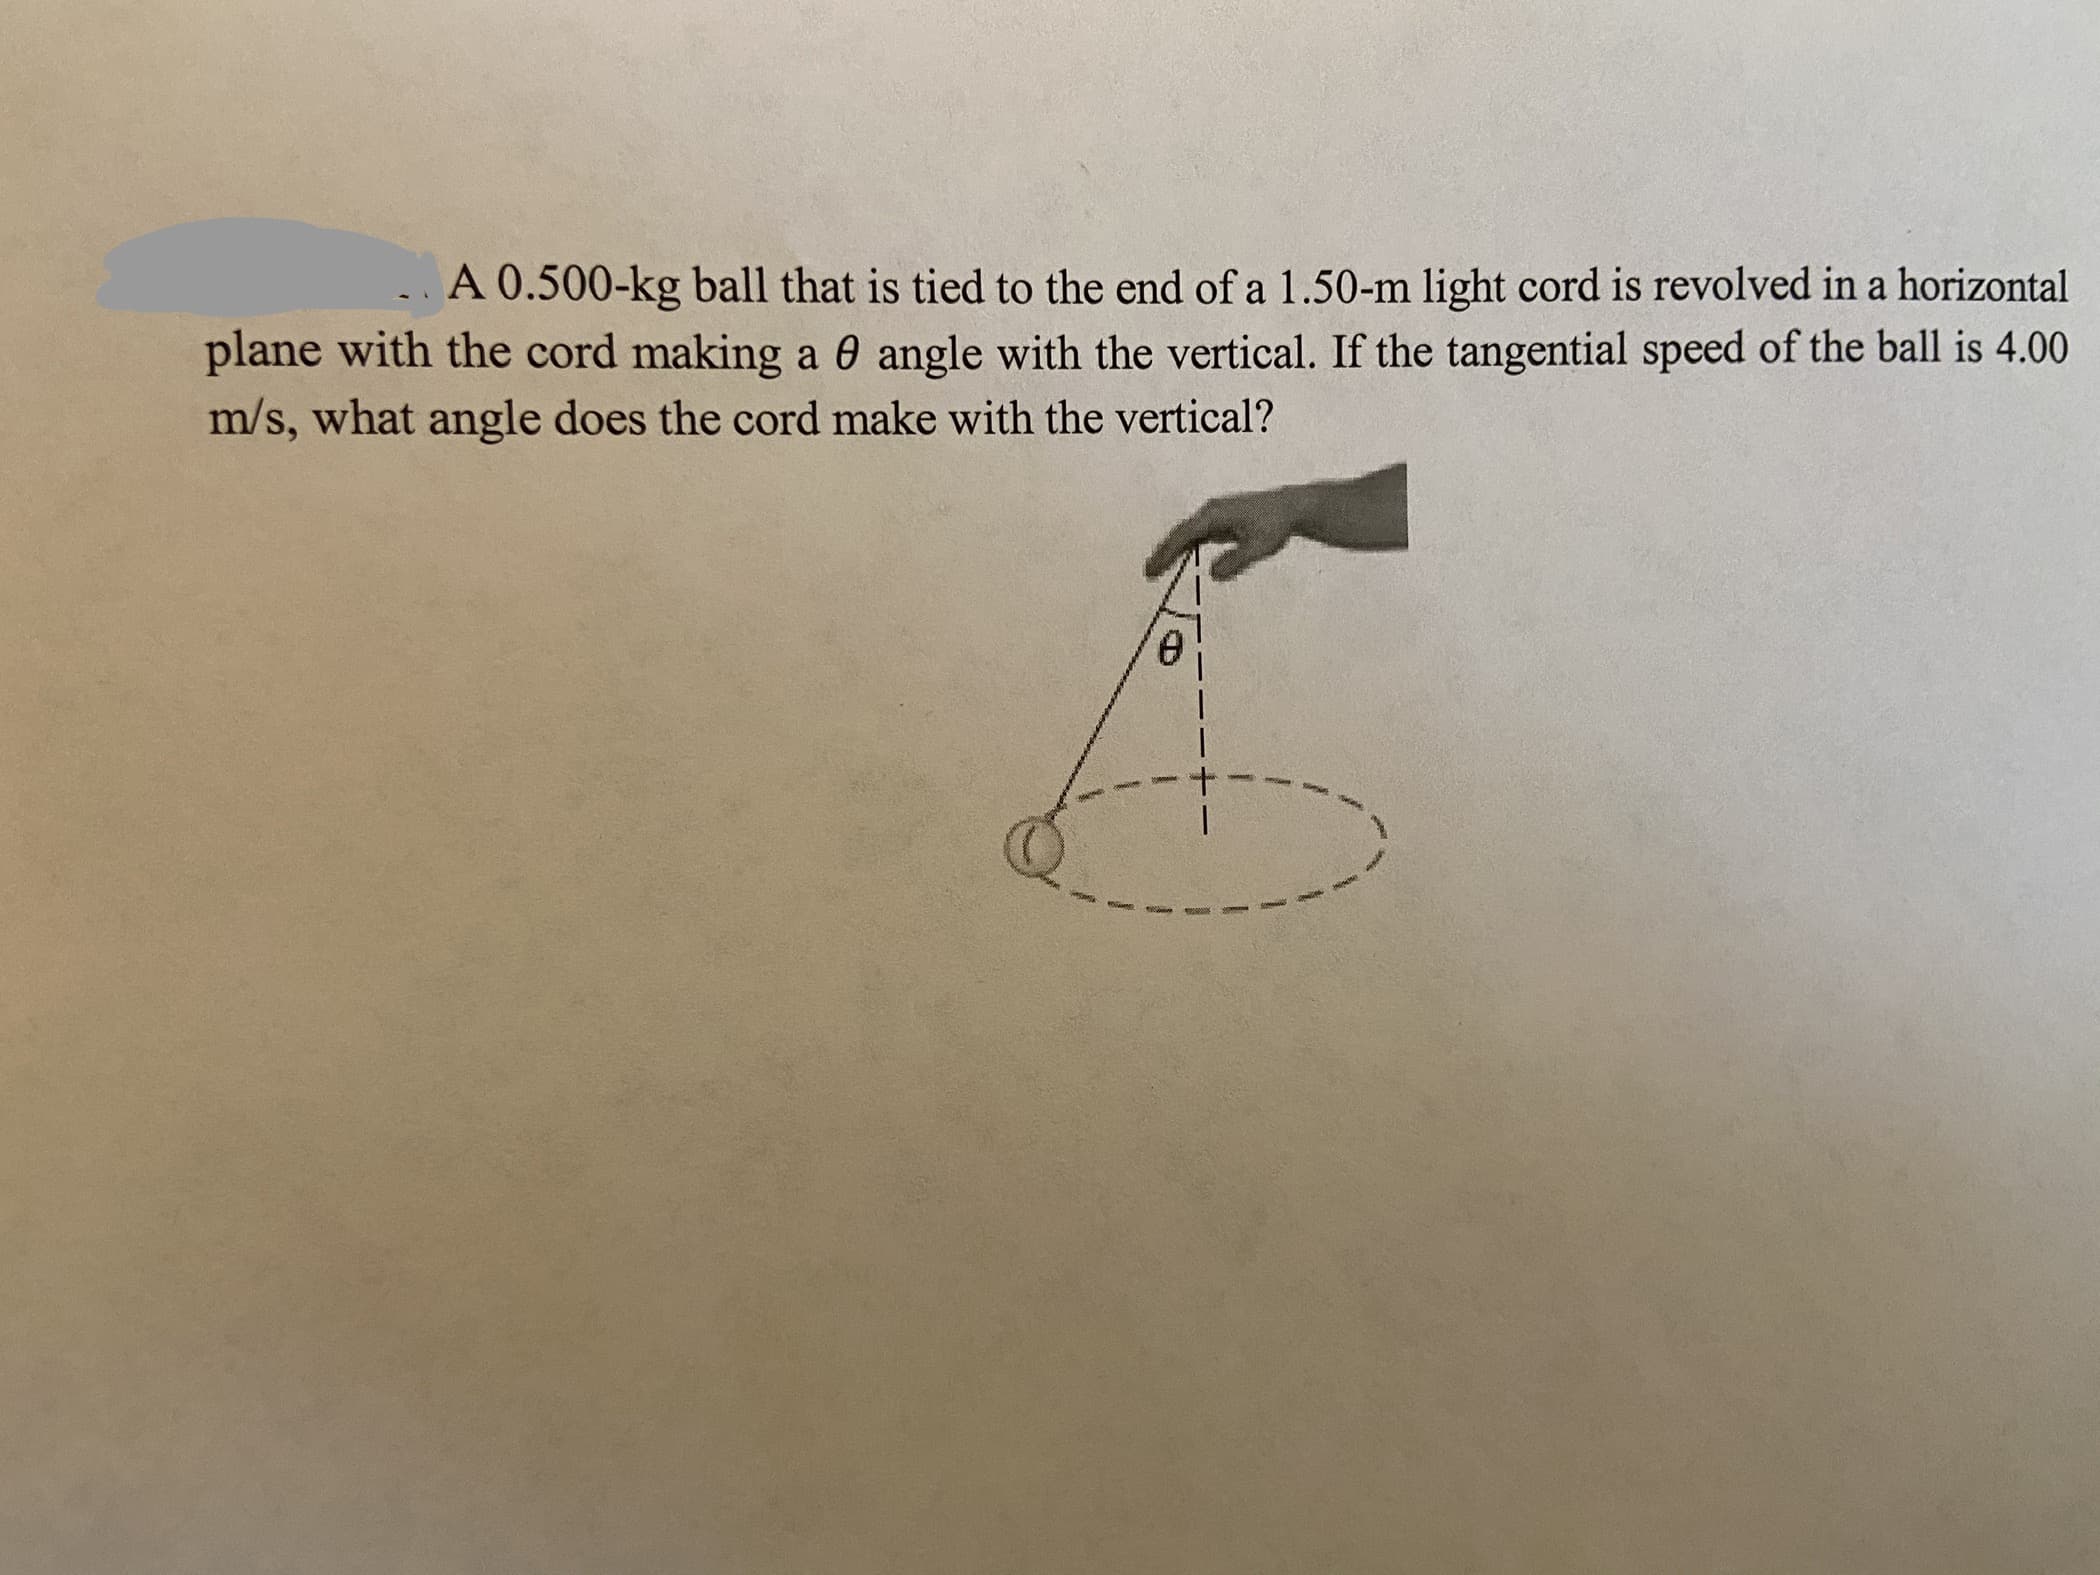 A 0.500-kg ball that is tied to the end of a 1.50-m light cord is revolved in a horizontal
plane with the cord making a 0 angle with the vertical. If the tangential speed of the ball is 4.00
m/s, what angle does the cord make with the vertical?
e.
